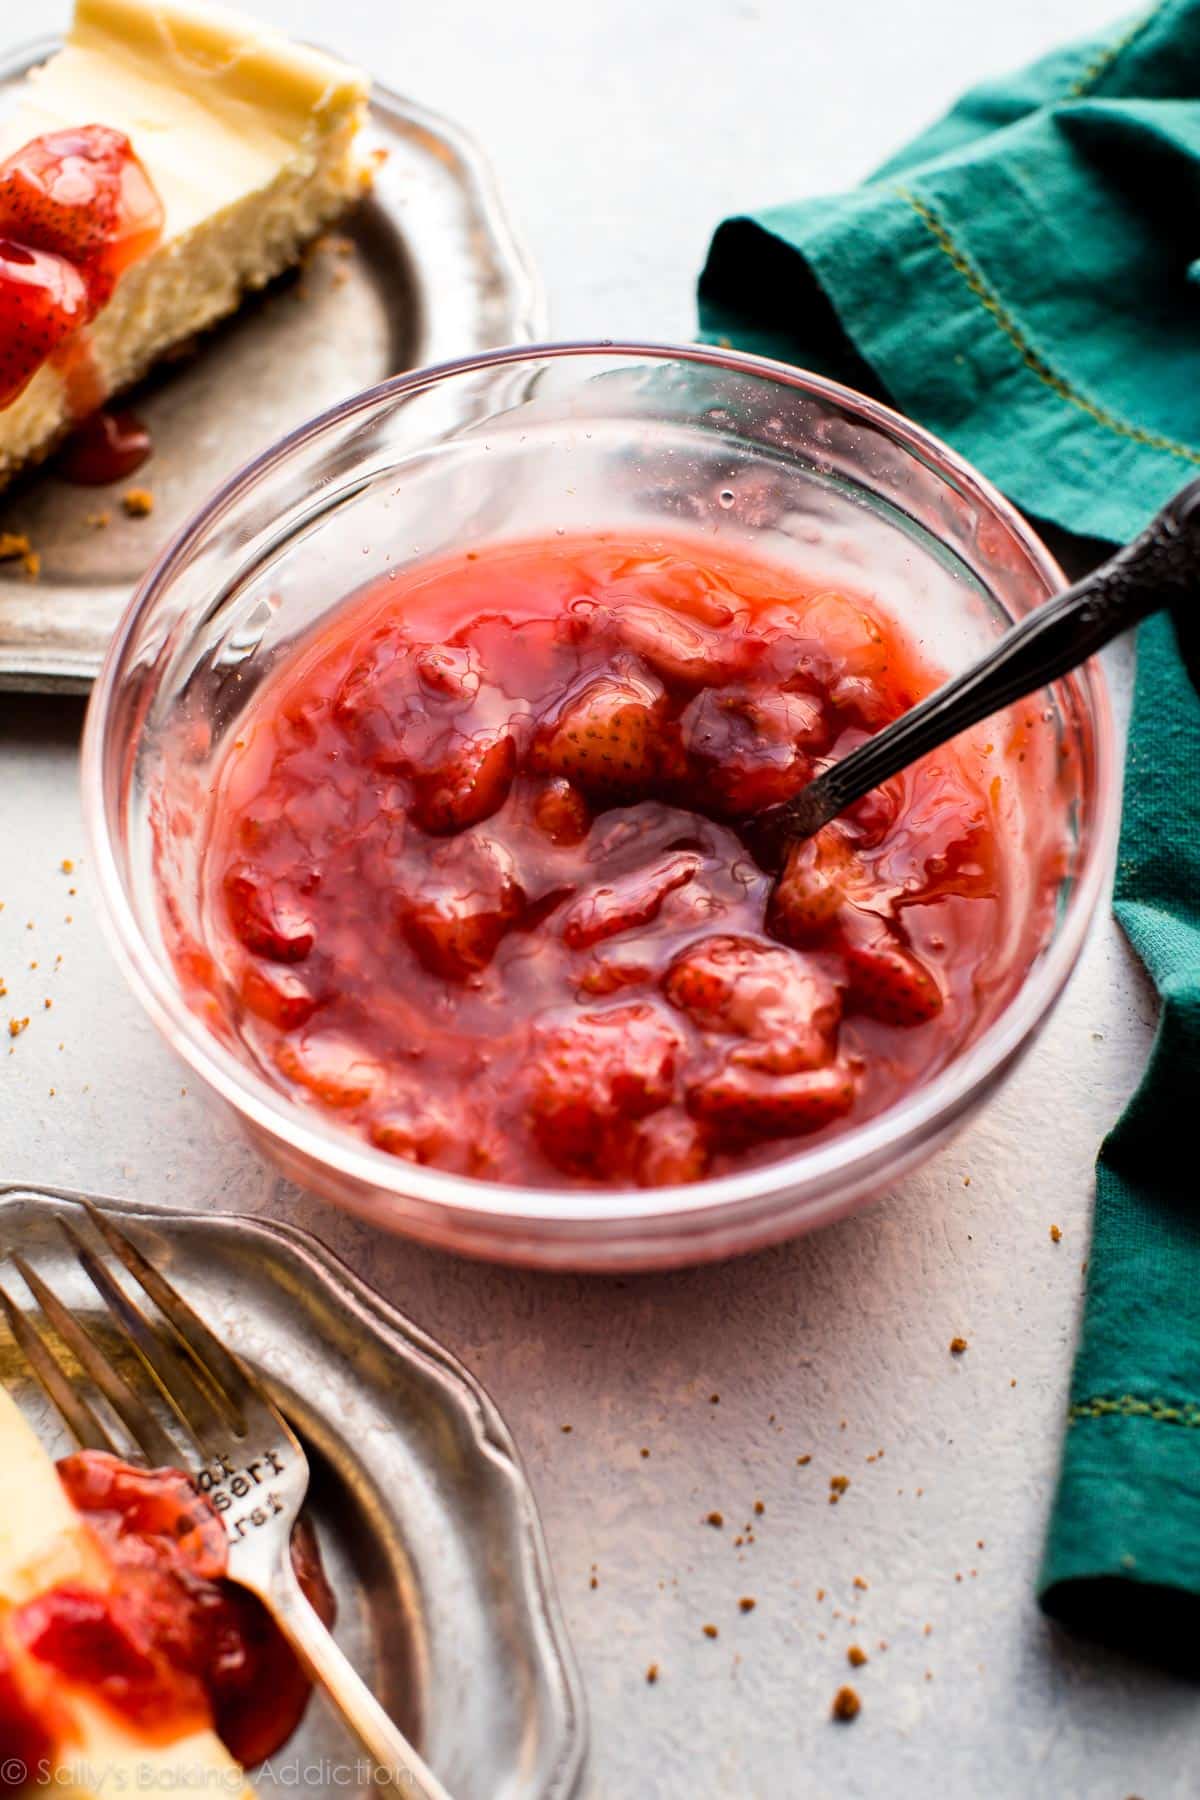 strawberry sauce in a glass bowl